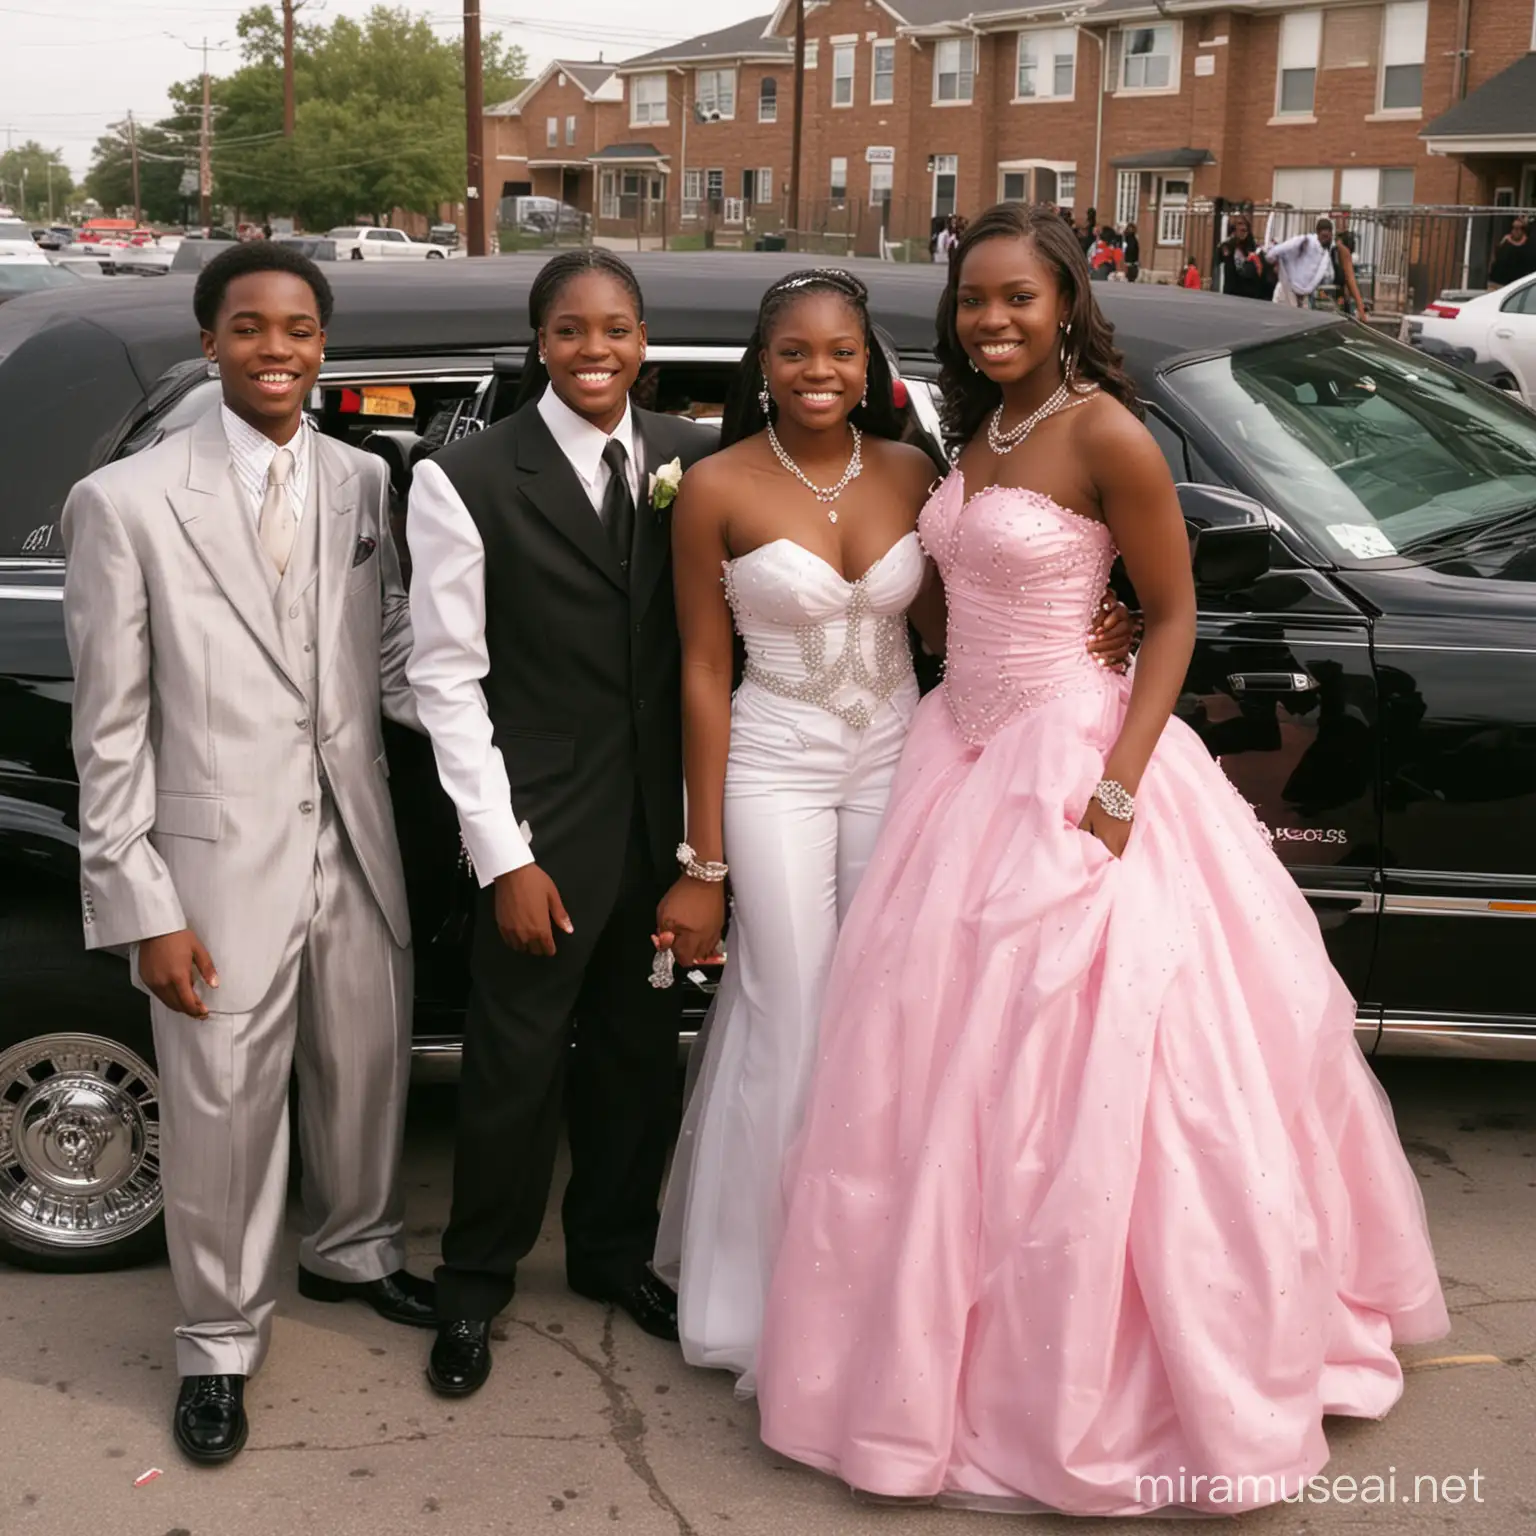 African american high school prom in 2008 late 2000's hood ghetto fabalous prom flashy limo and flashy stylish suits and aexy stunning girls smiling snarling